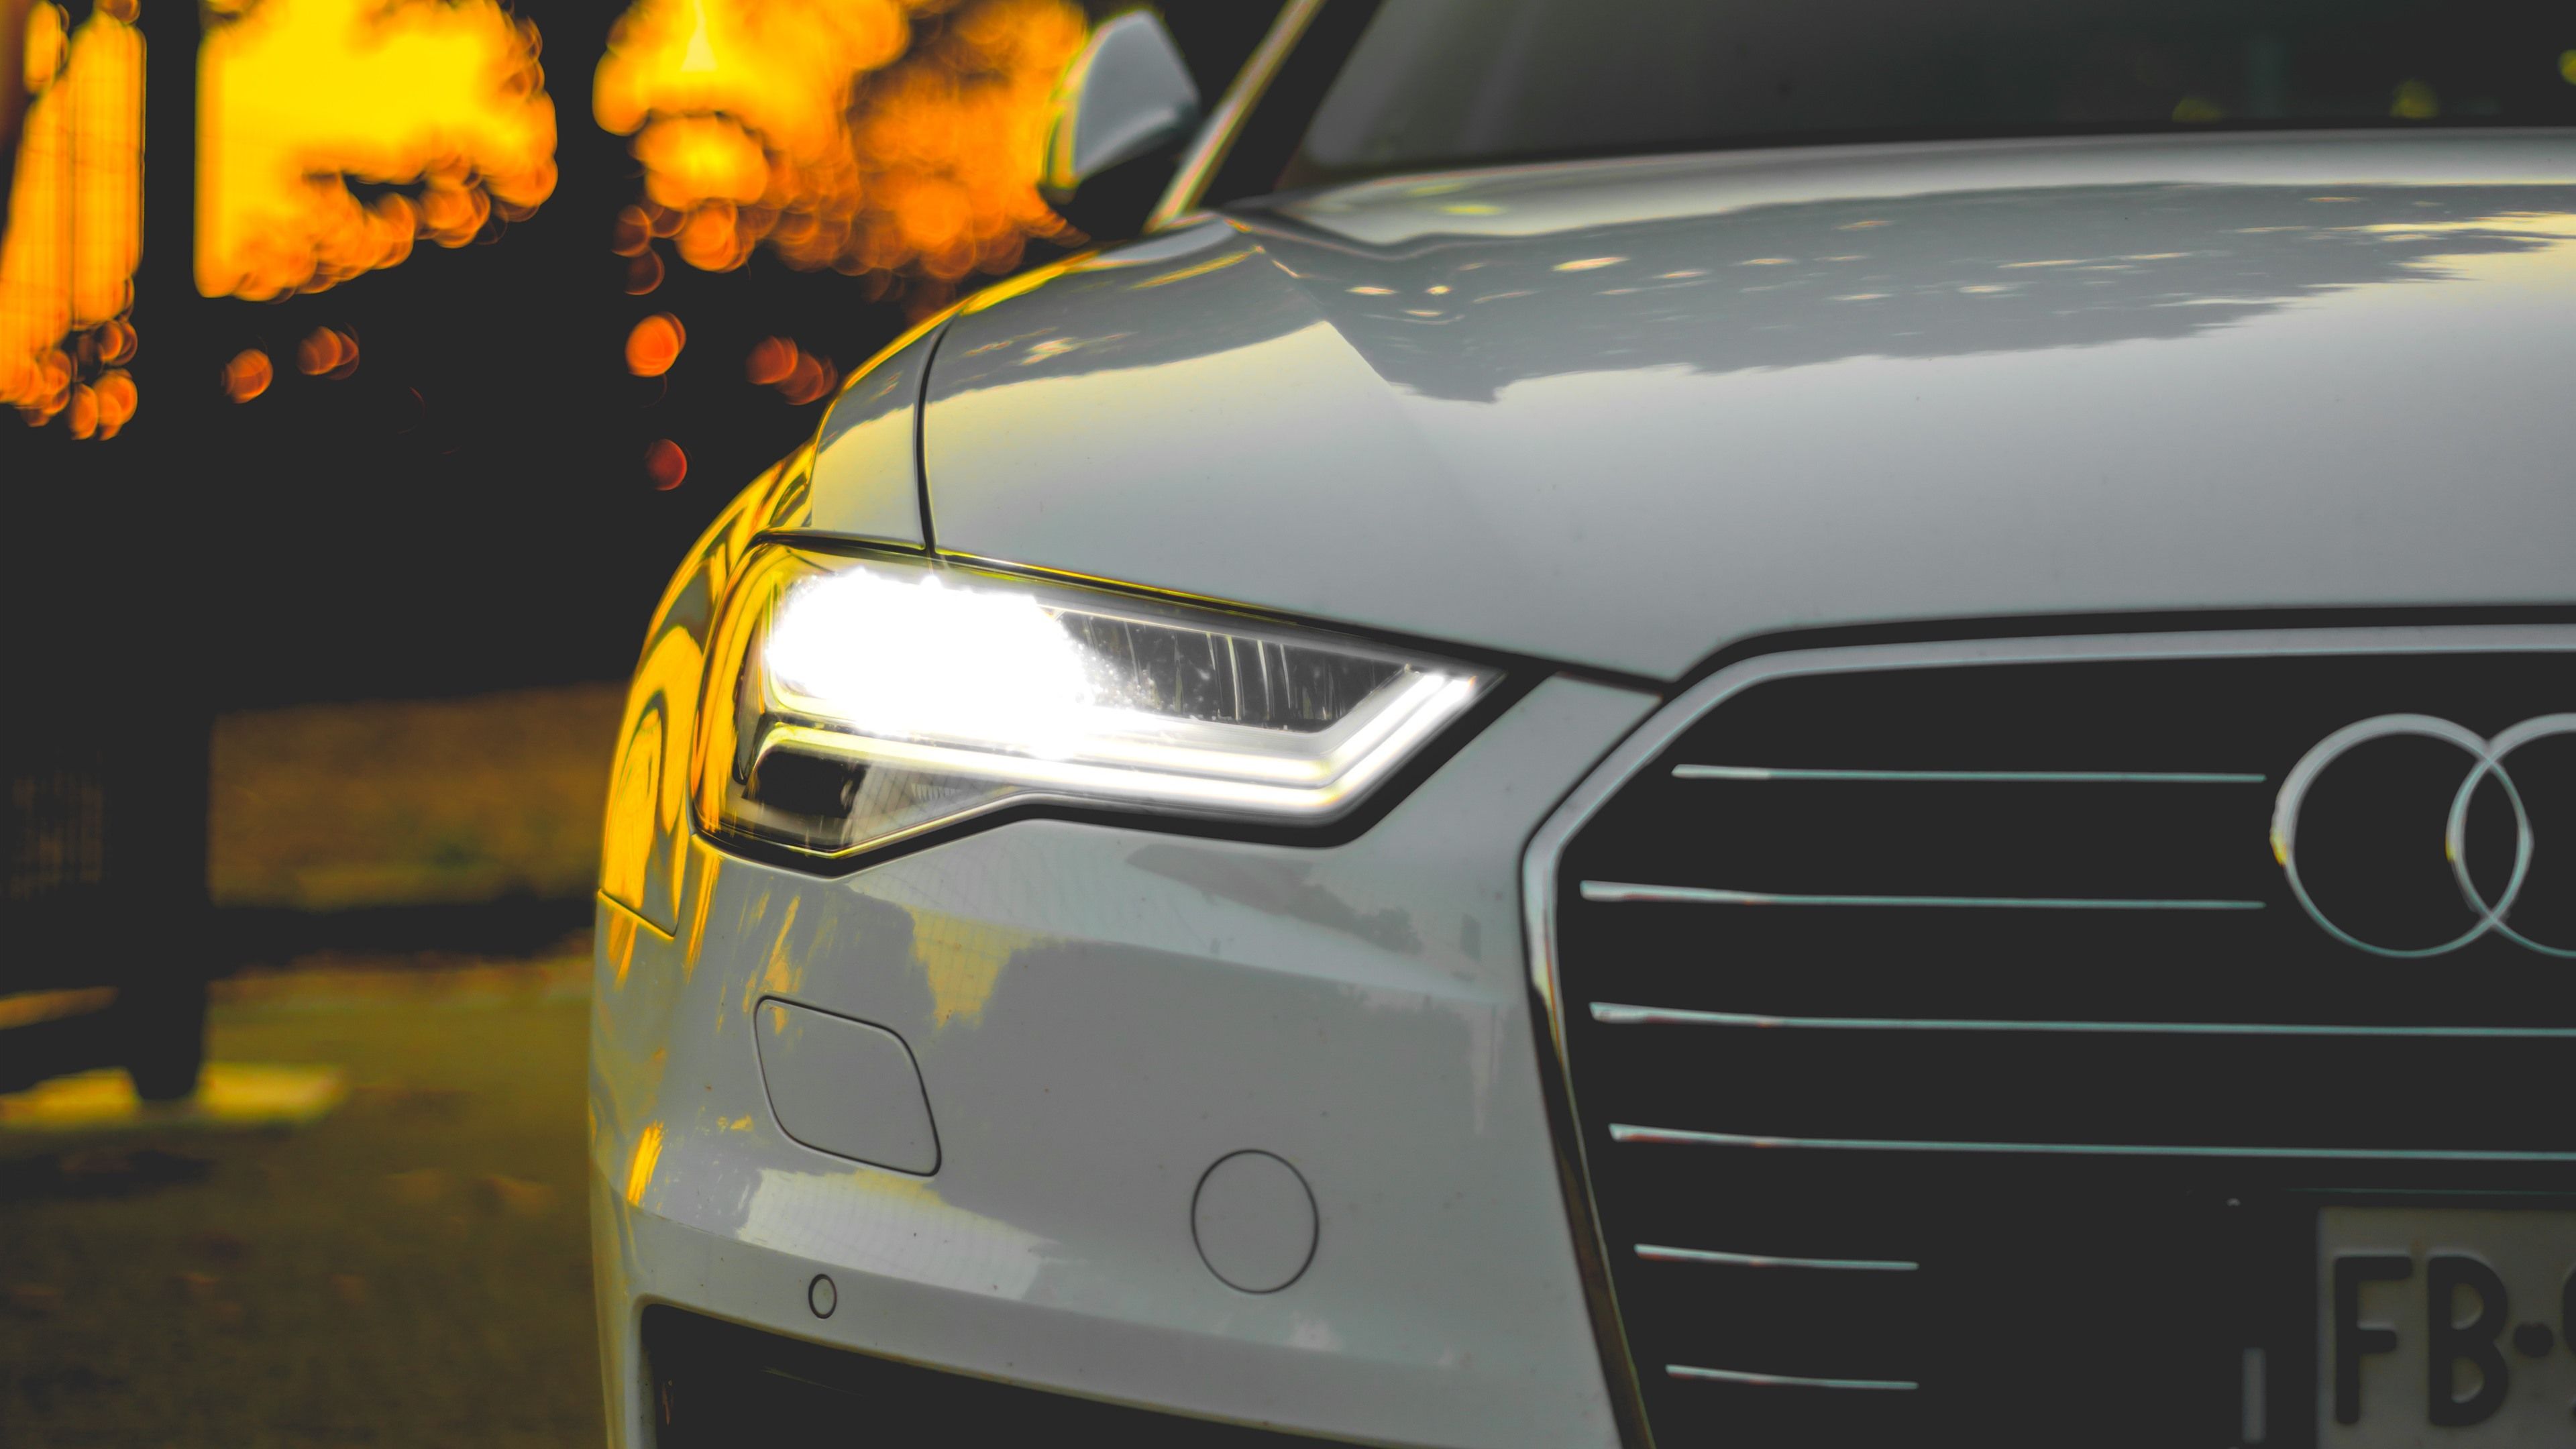 Wallpaper Audi white car front view, headlight 3840x2160 UHD 4K Picture, Image